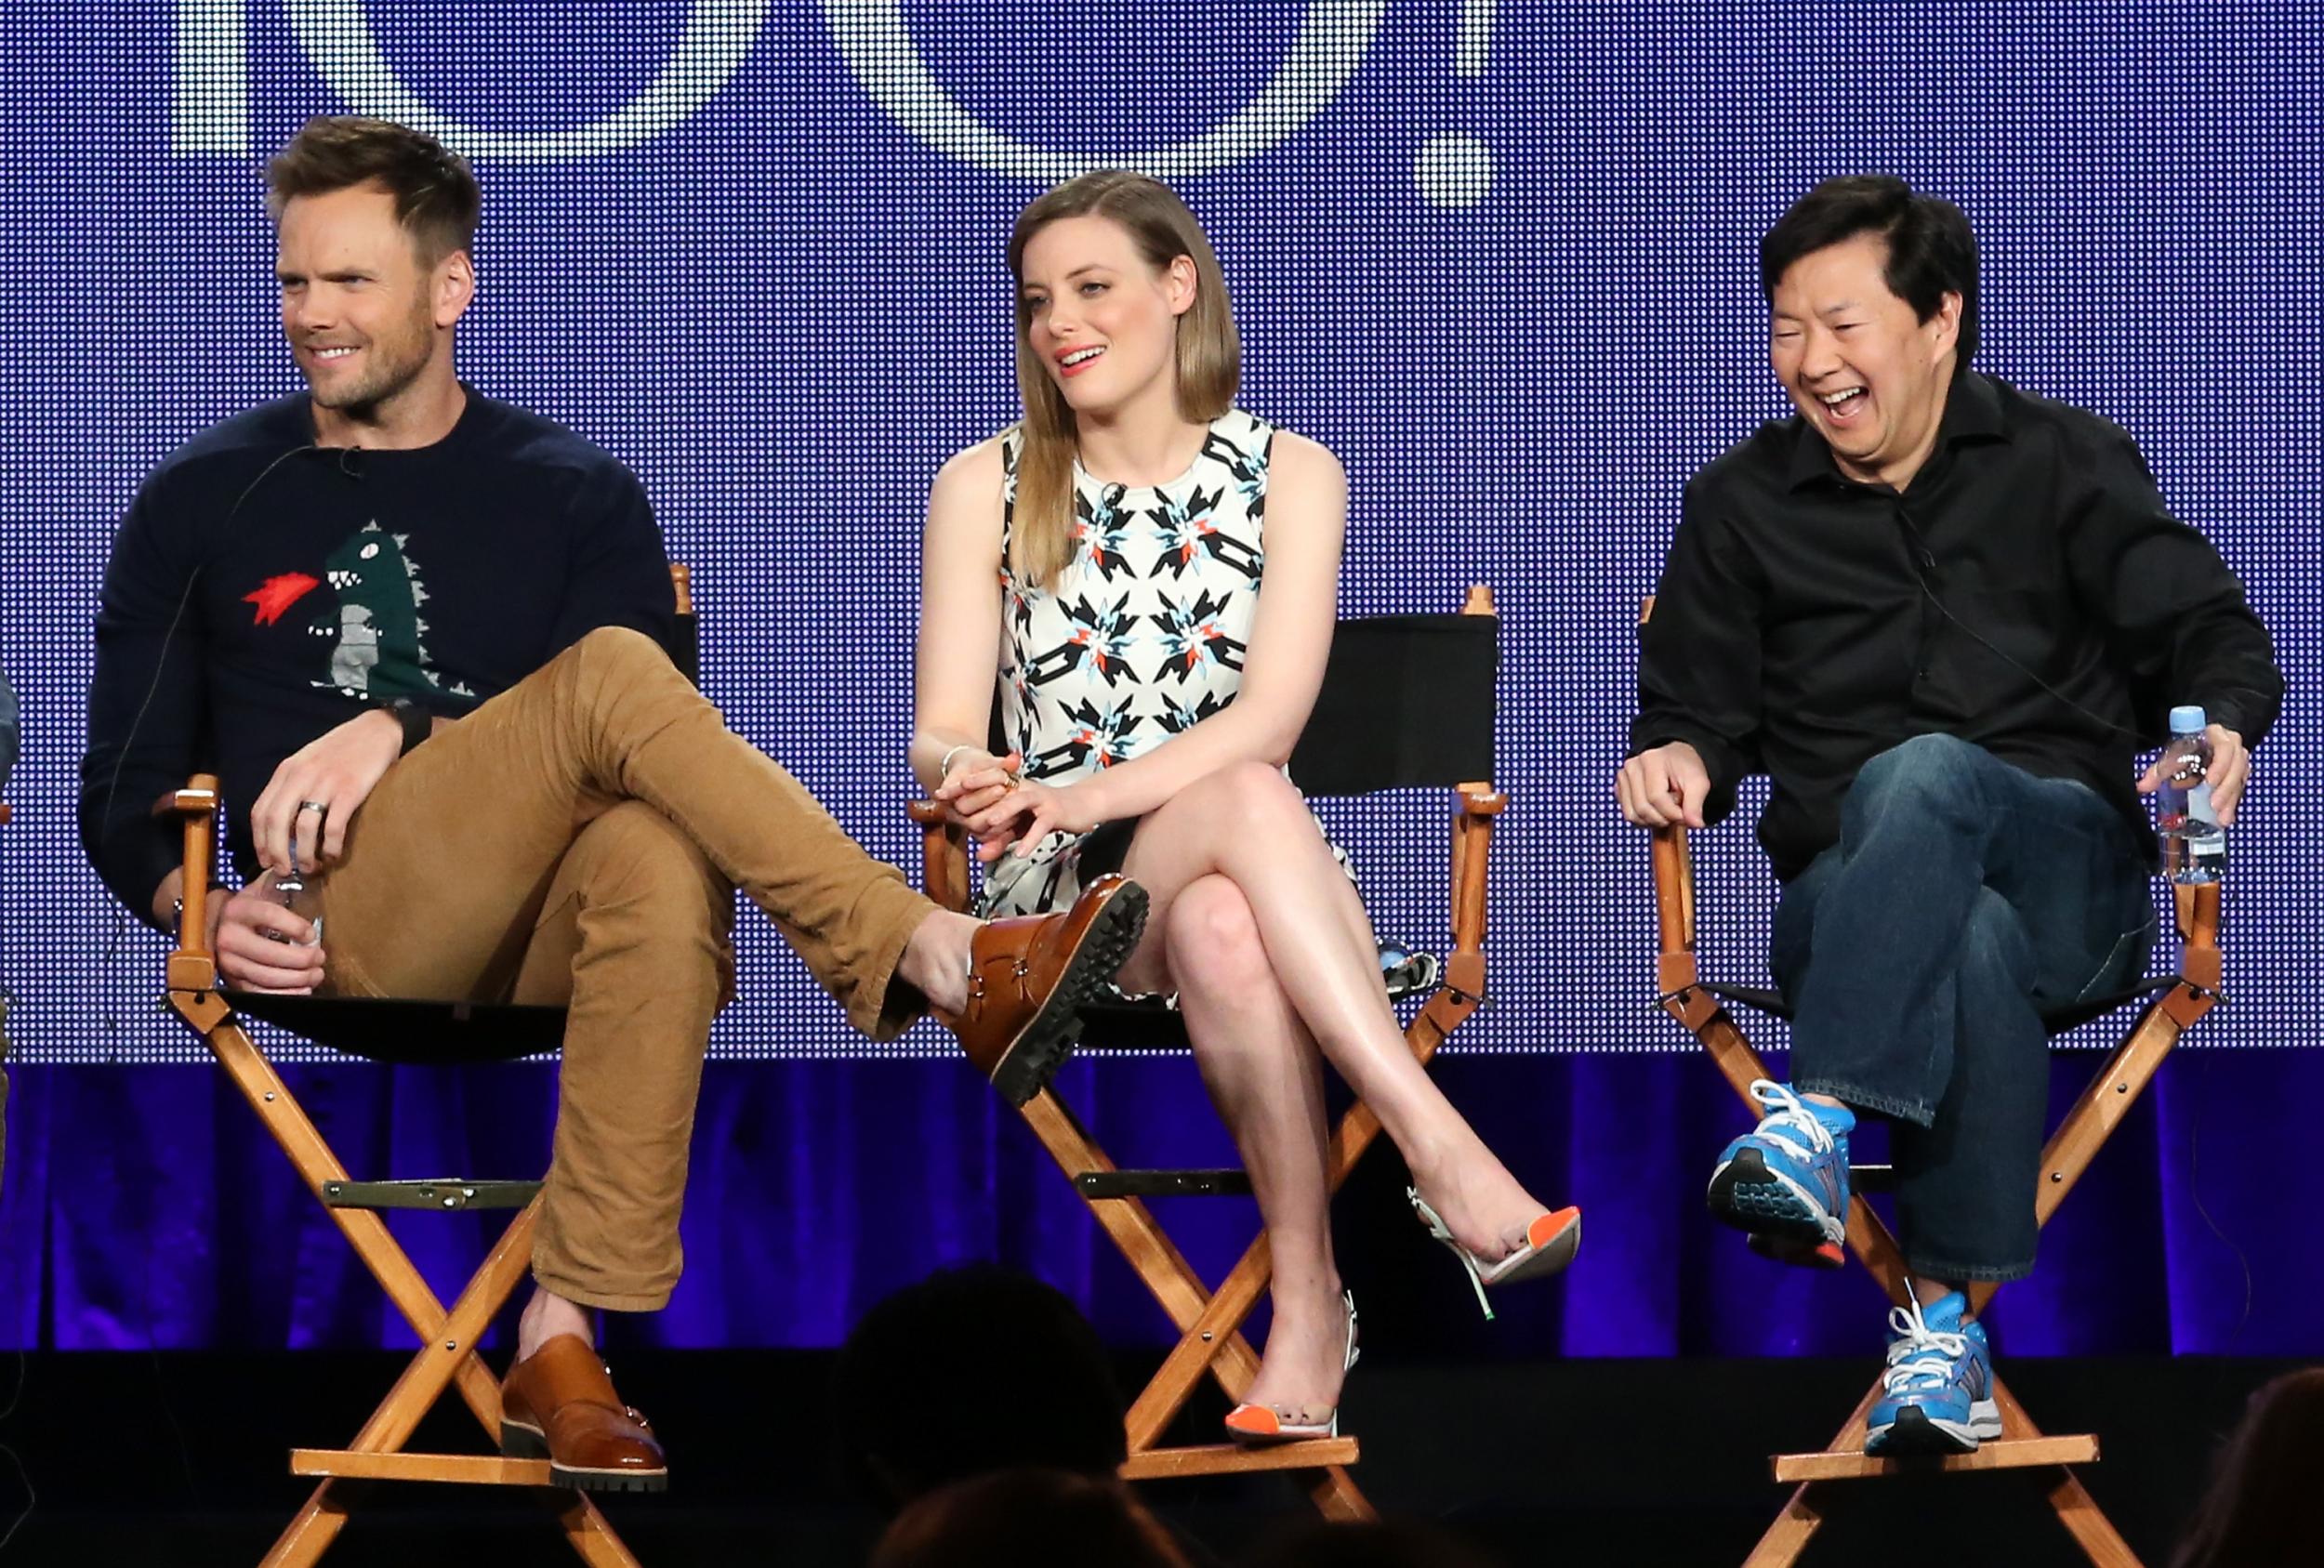 Joel McHale, Gillian Jacobs and Ken Jeong speak during the ‘C辞尘尘耻苍颈迟测’ panel as part of the 2015 Winter Television Critics Association Press Tour